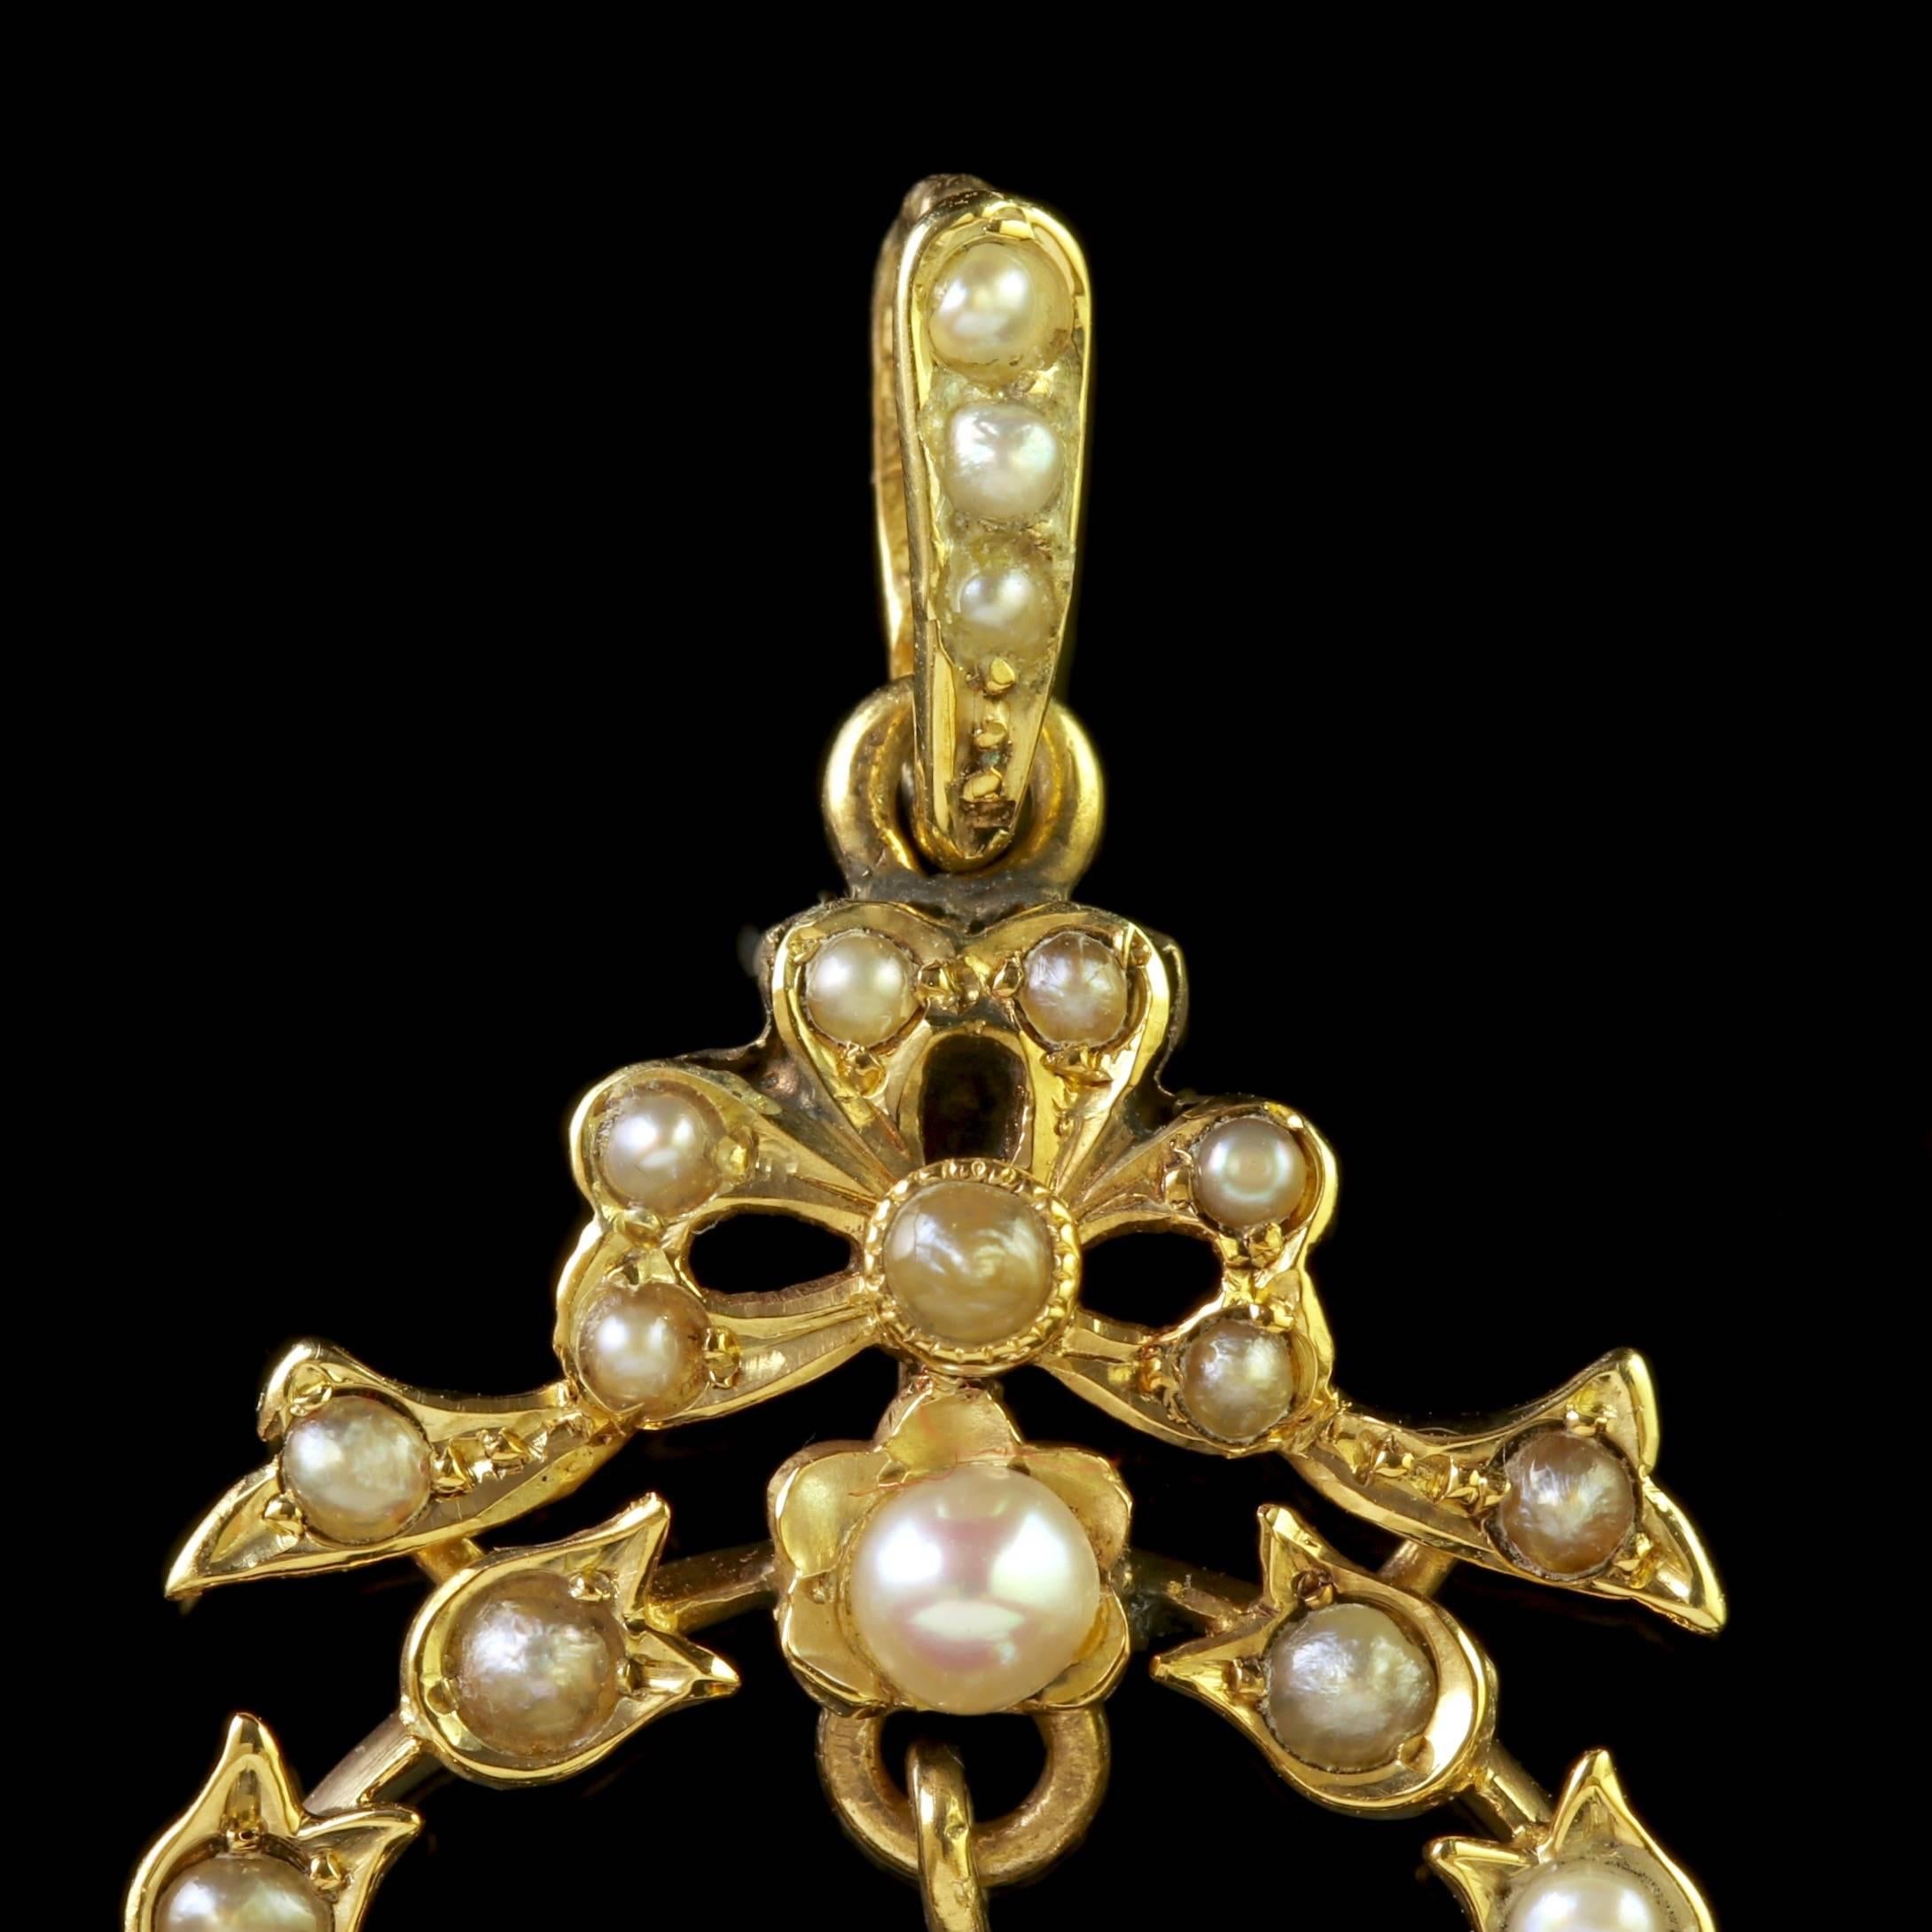 Antique Edwardian Peridot Pearl Pendant 18 Carat Gold In Excellent Condition For Sale In Lancaster, Lancashire